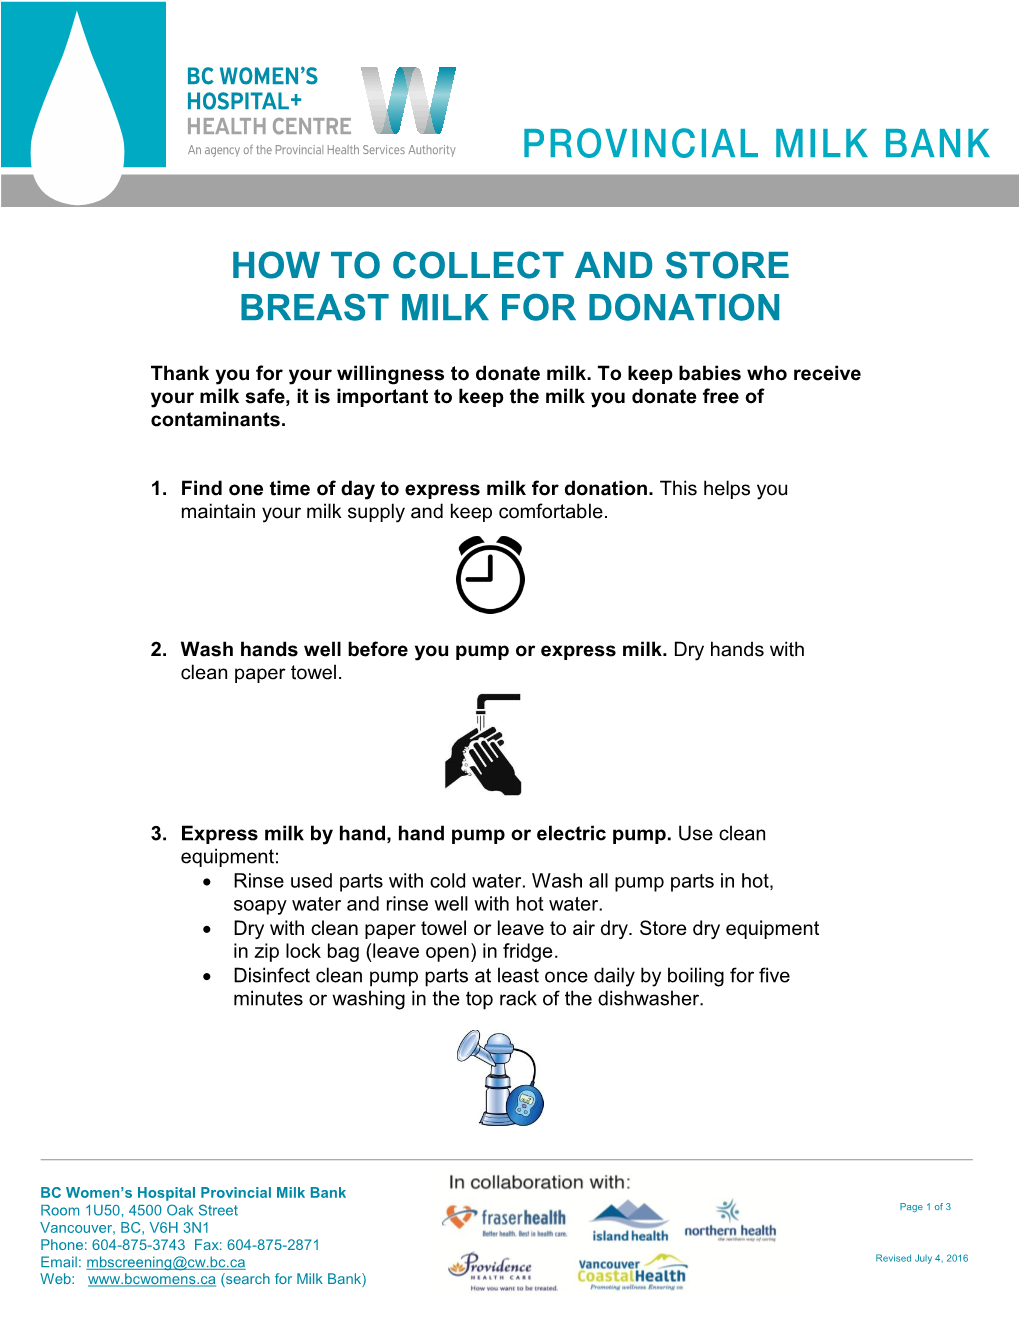 How to Collect and Store Breast Milk for Donation